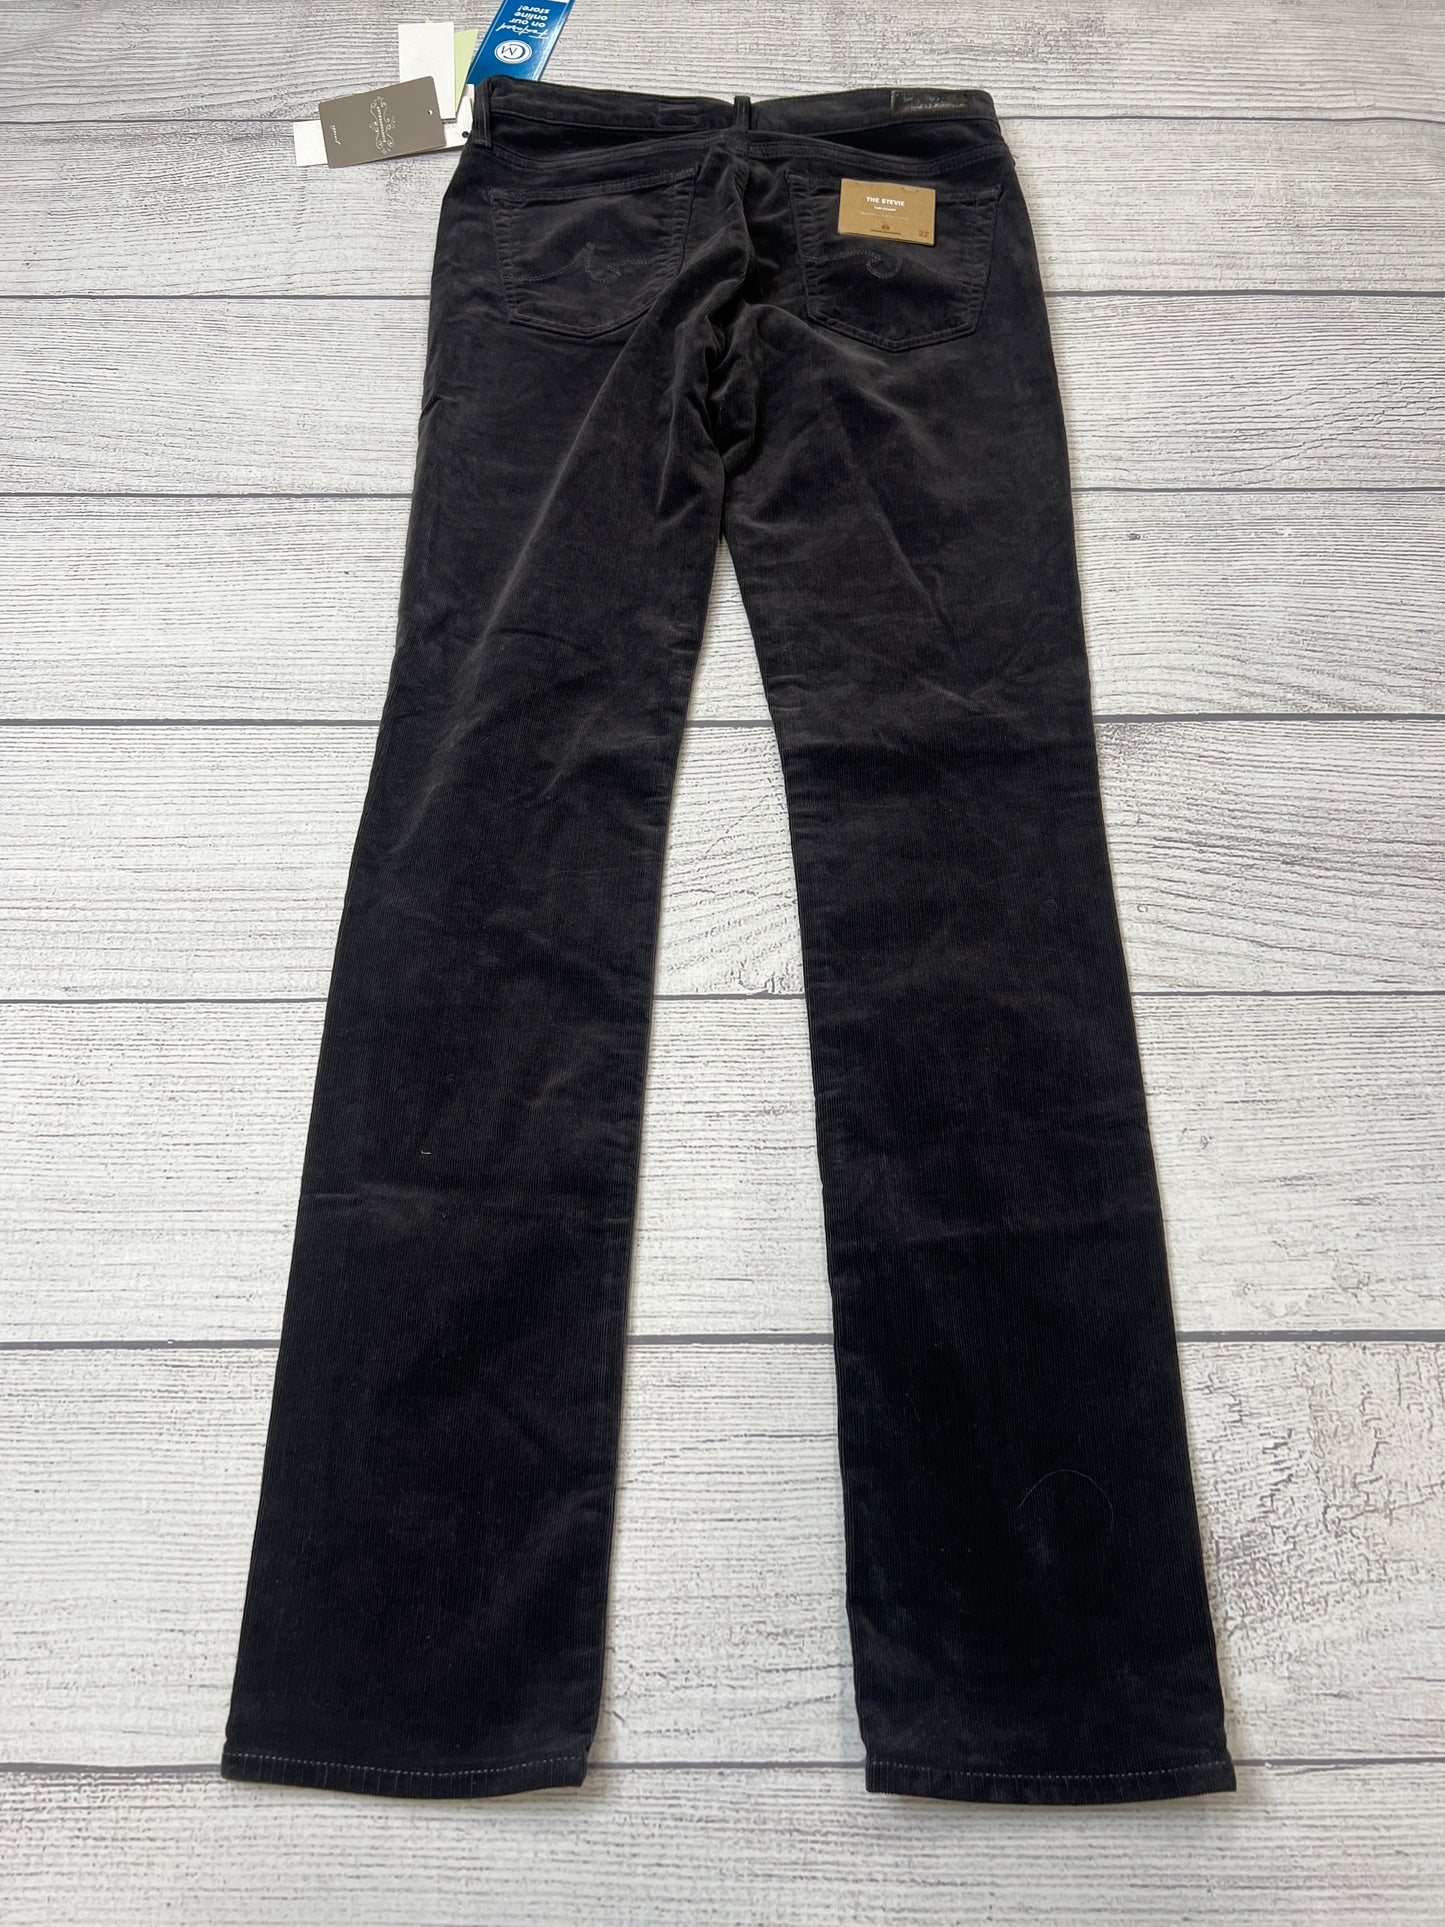 Jeans Designer By Adriano Goldschmied  Size: 4/27